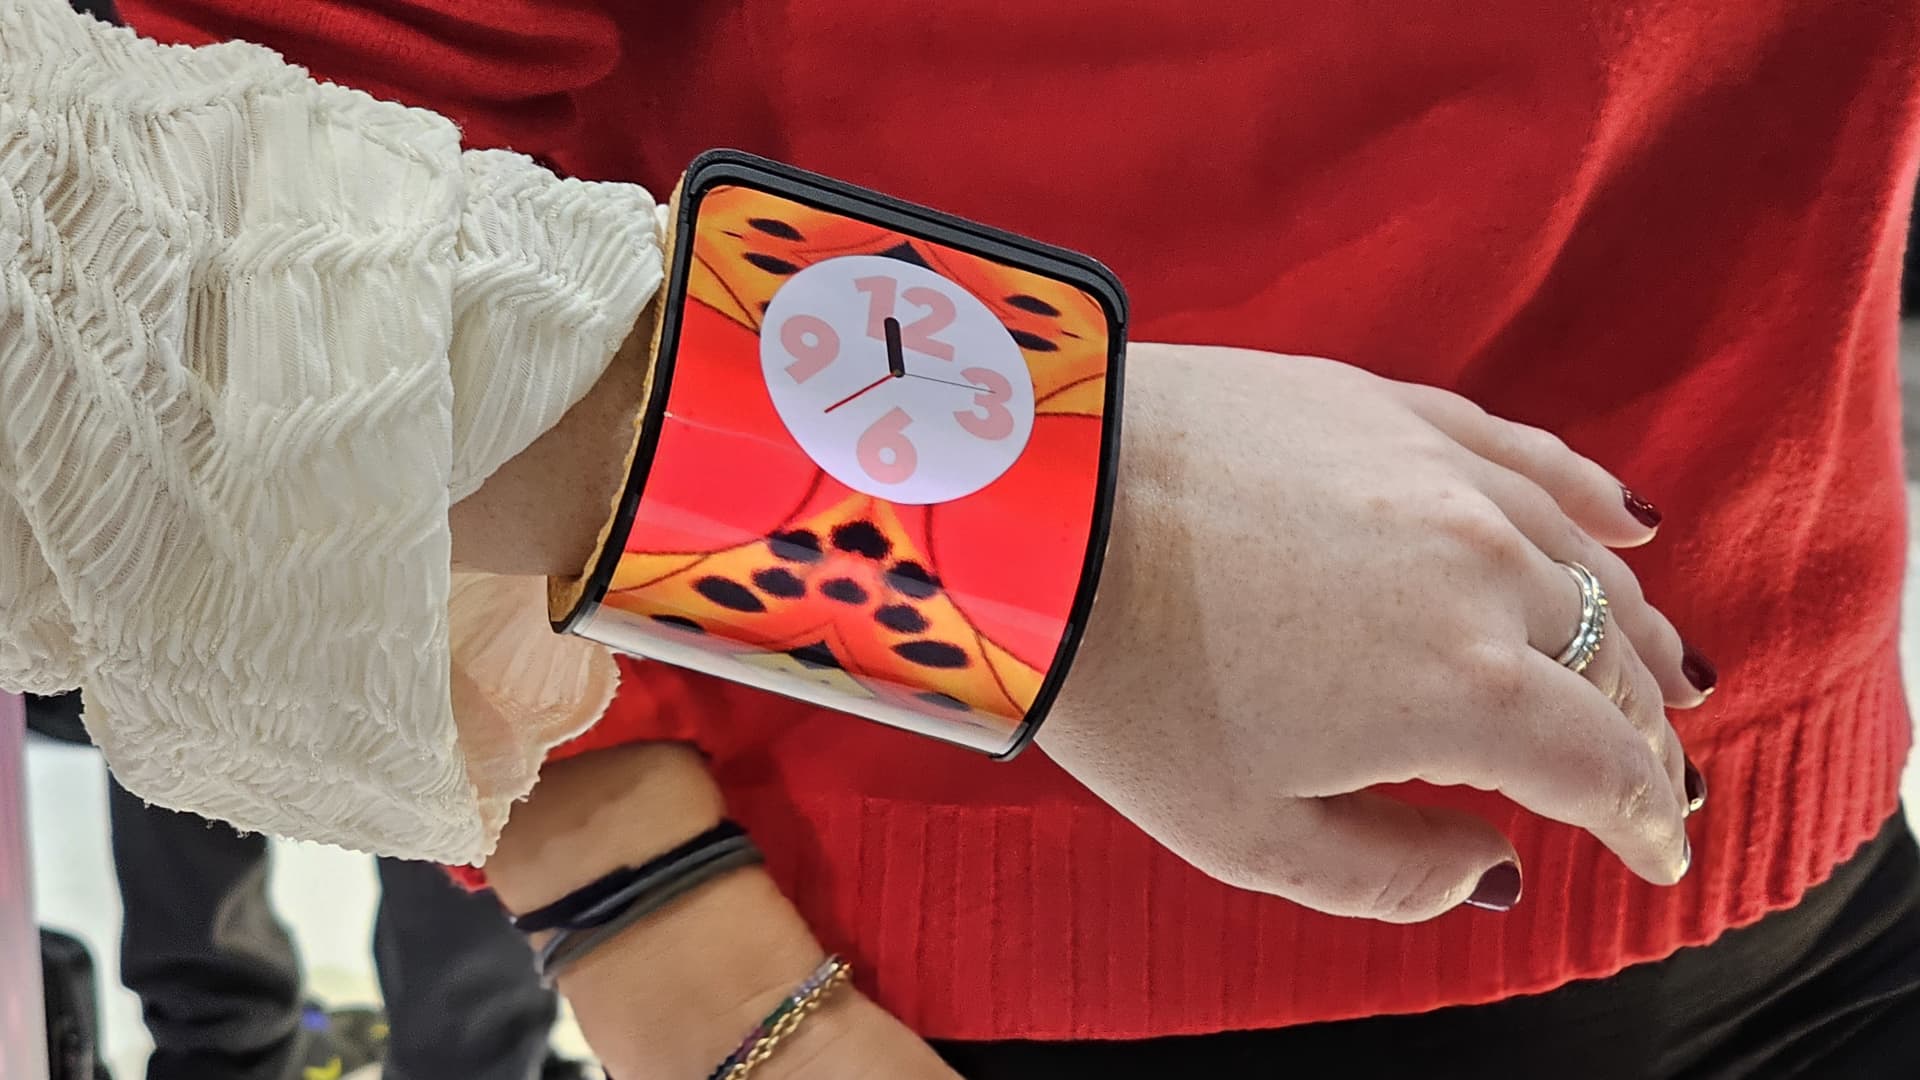 Motorola shows off a concept smartphone that can wrap around your wrist